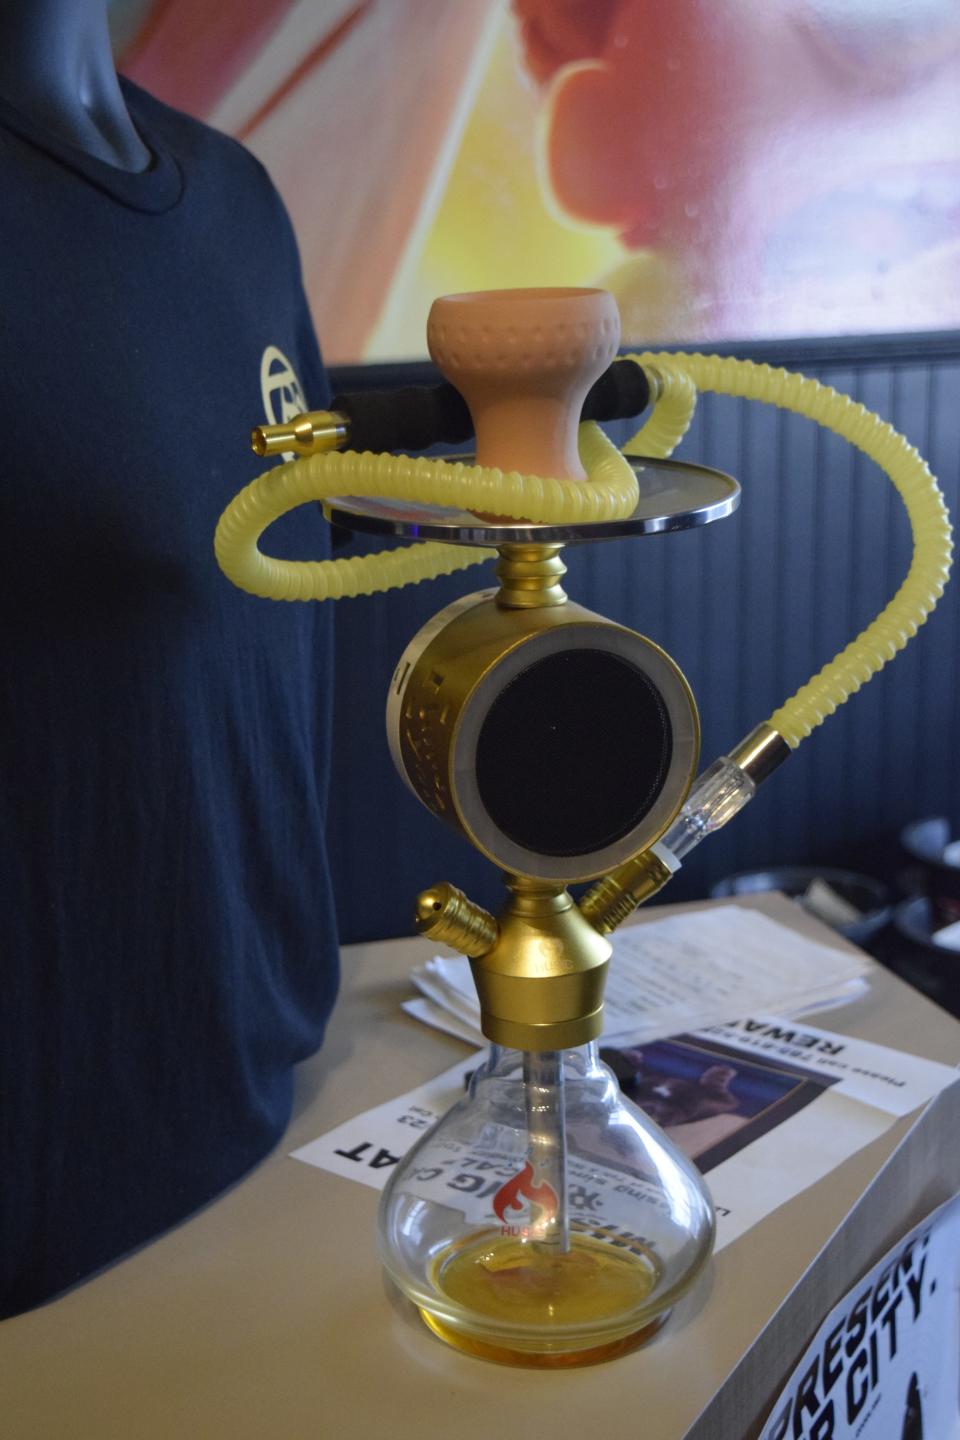 Hookahs, water pipes used to smoke shisha, come in a variety of sizes and abilities. This particular pipe incorporates a Bluetooth speaker into its body.